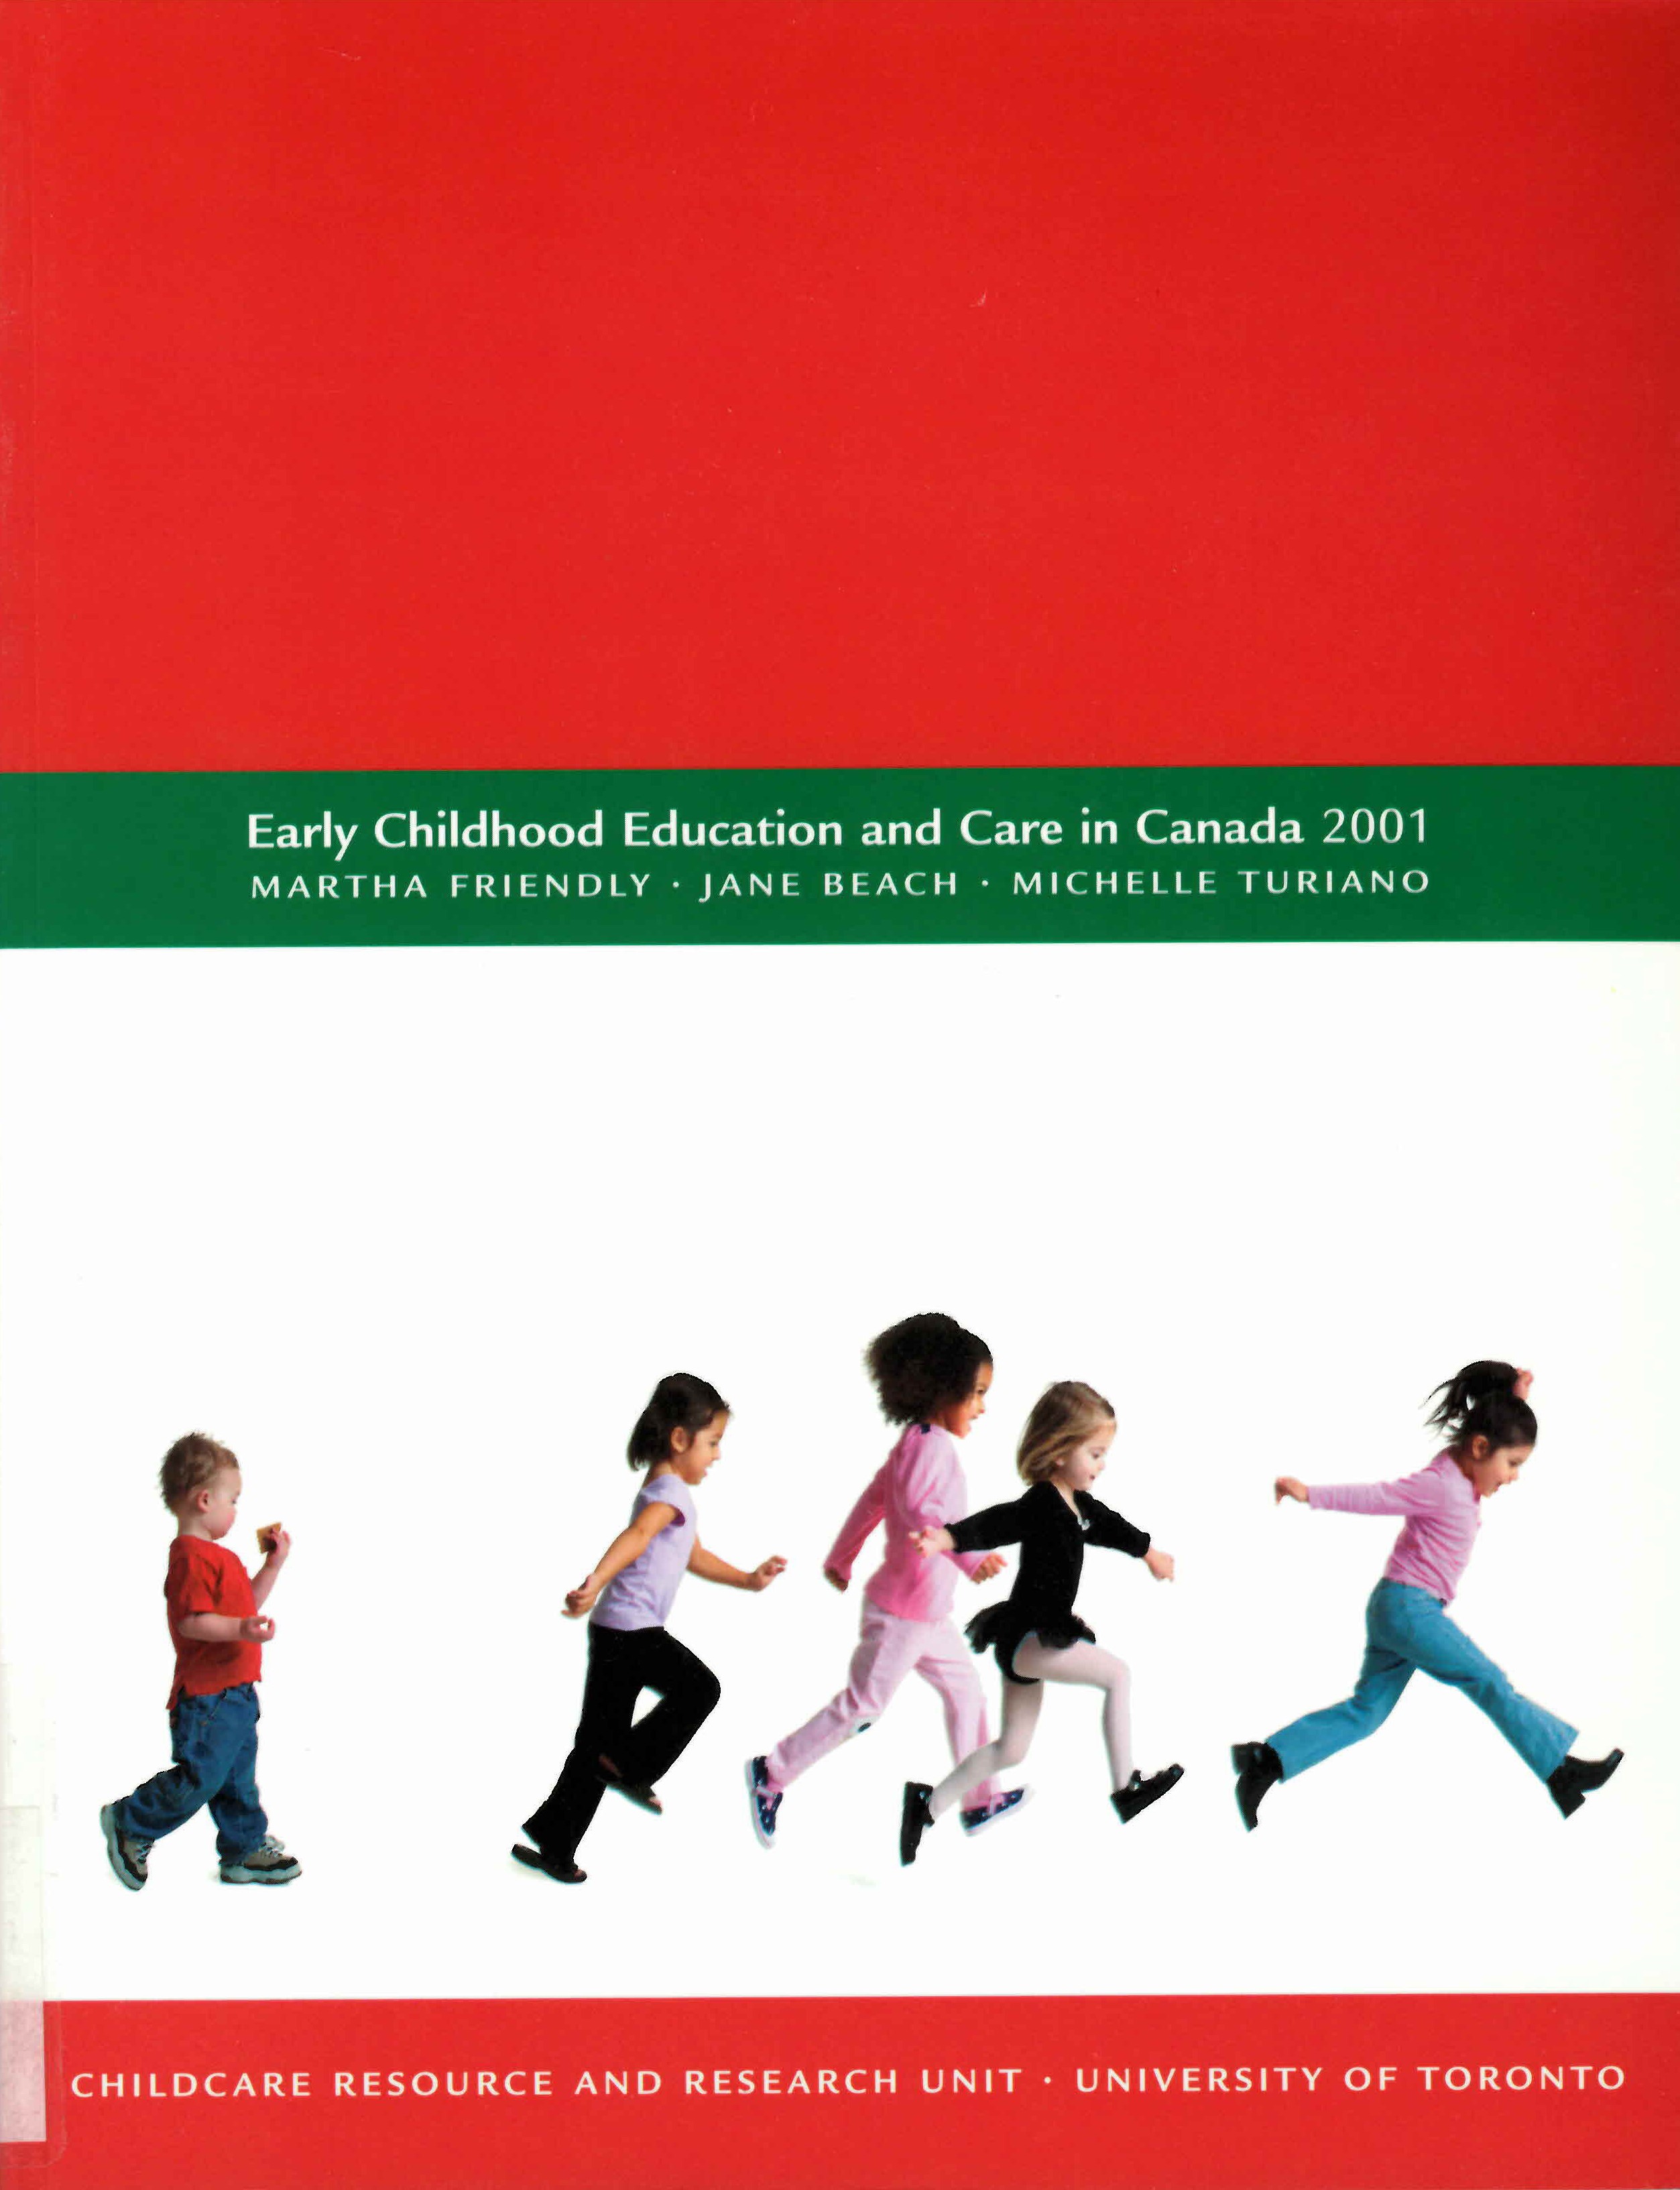 Early childhood education and care in Canada : 2001